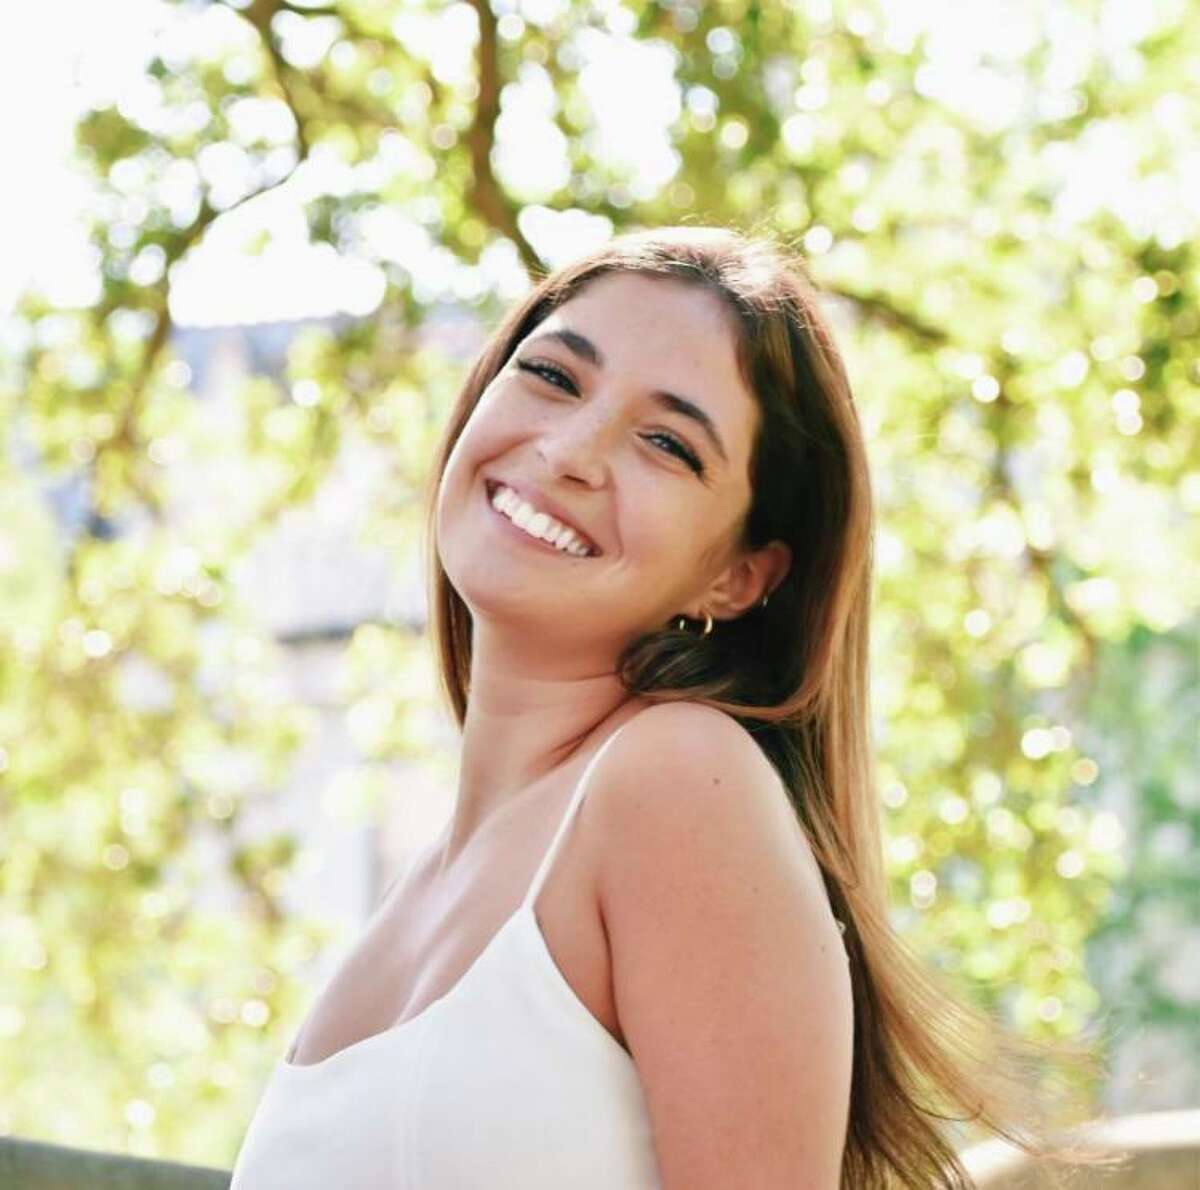 Ridgefield native Emma Cowles, 21, recalled her harried evacuation from New Orleans as hurricane Ida barreled through the city. Cowles attended Tulane University as an undergrad.